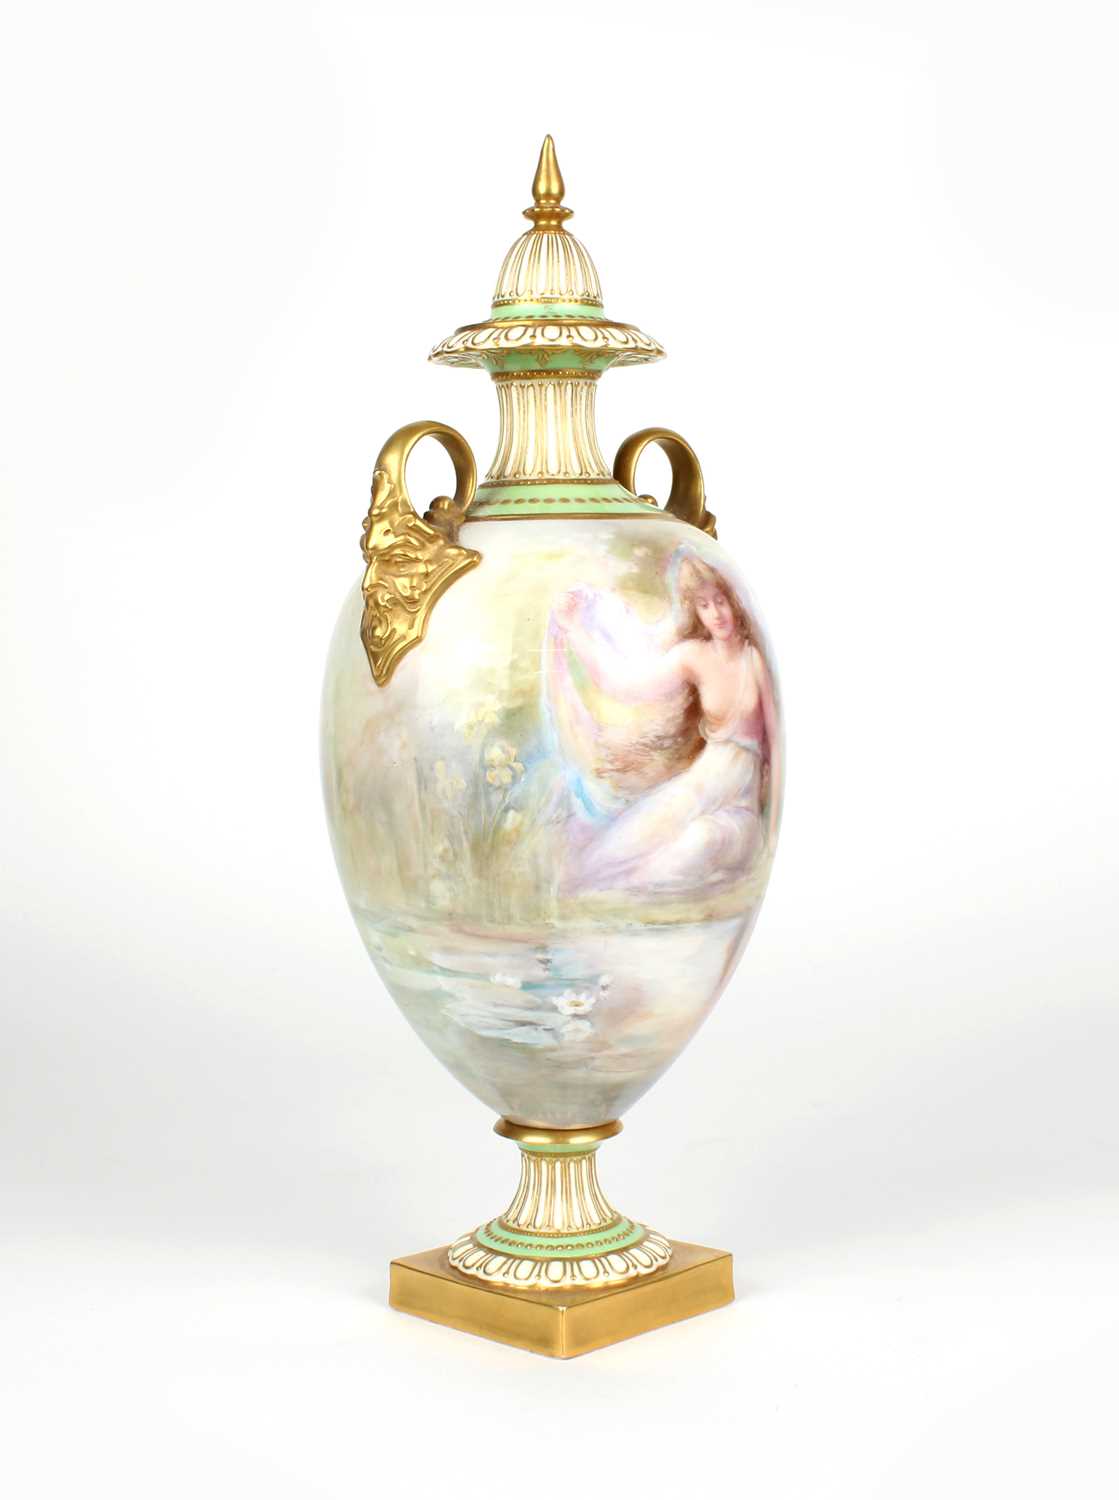 George White for Royal Doulton "Leda and the Swan" Urn - Image 8 of 20